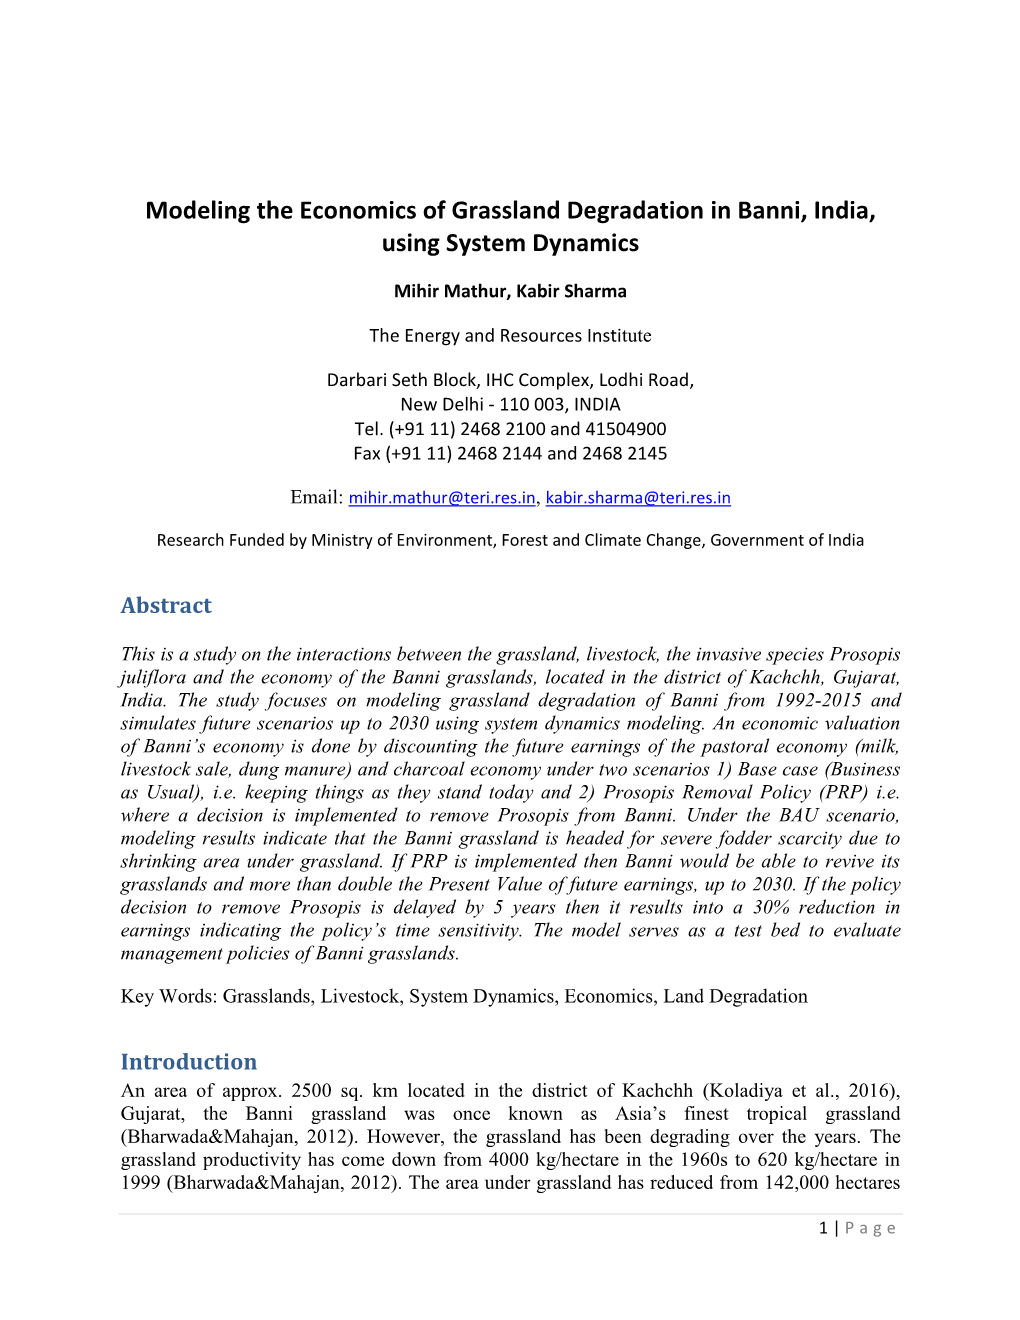 Modeling the Economics of Grassland Degradation in Banni, India, Using System Dynamics